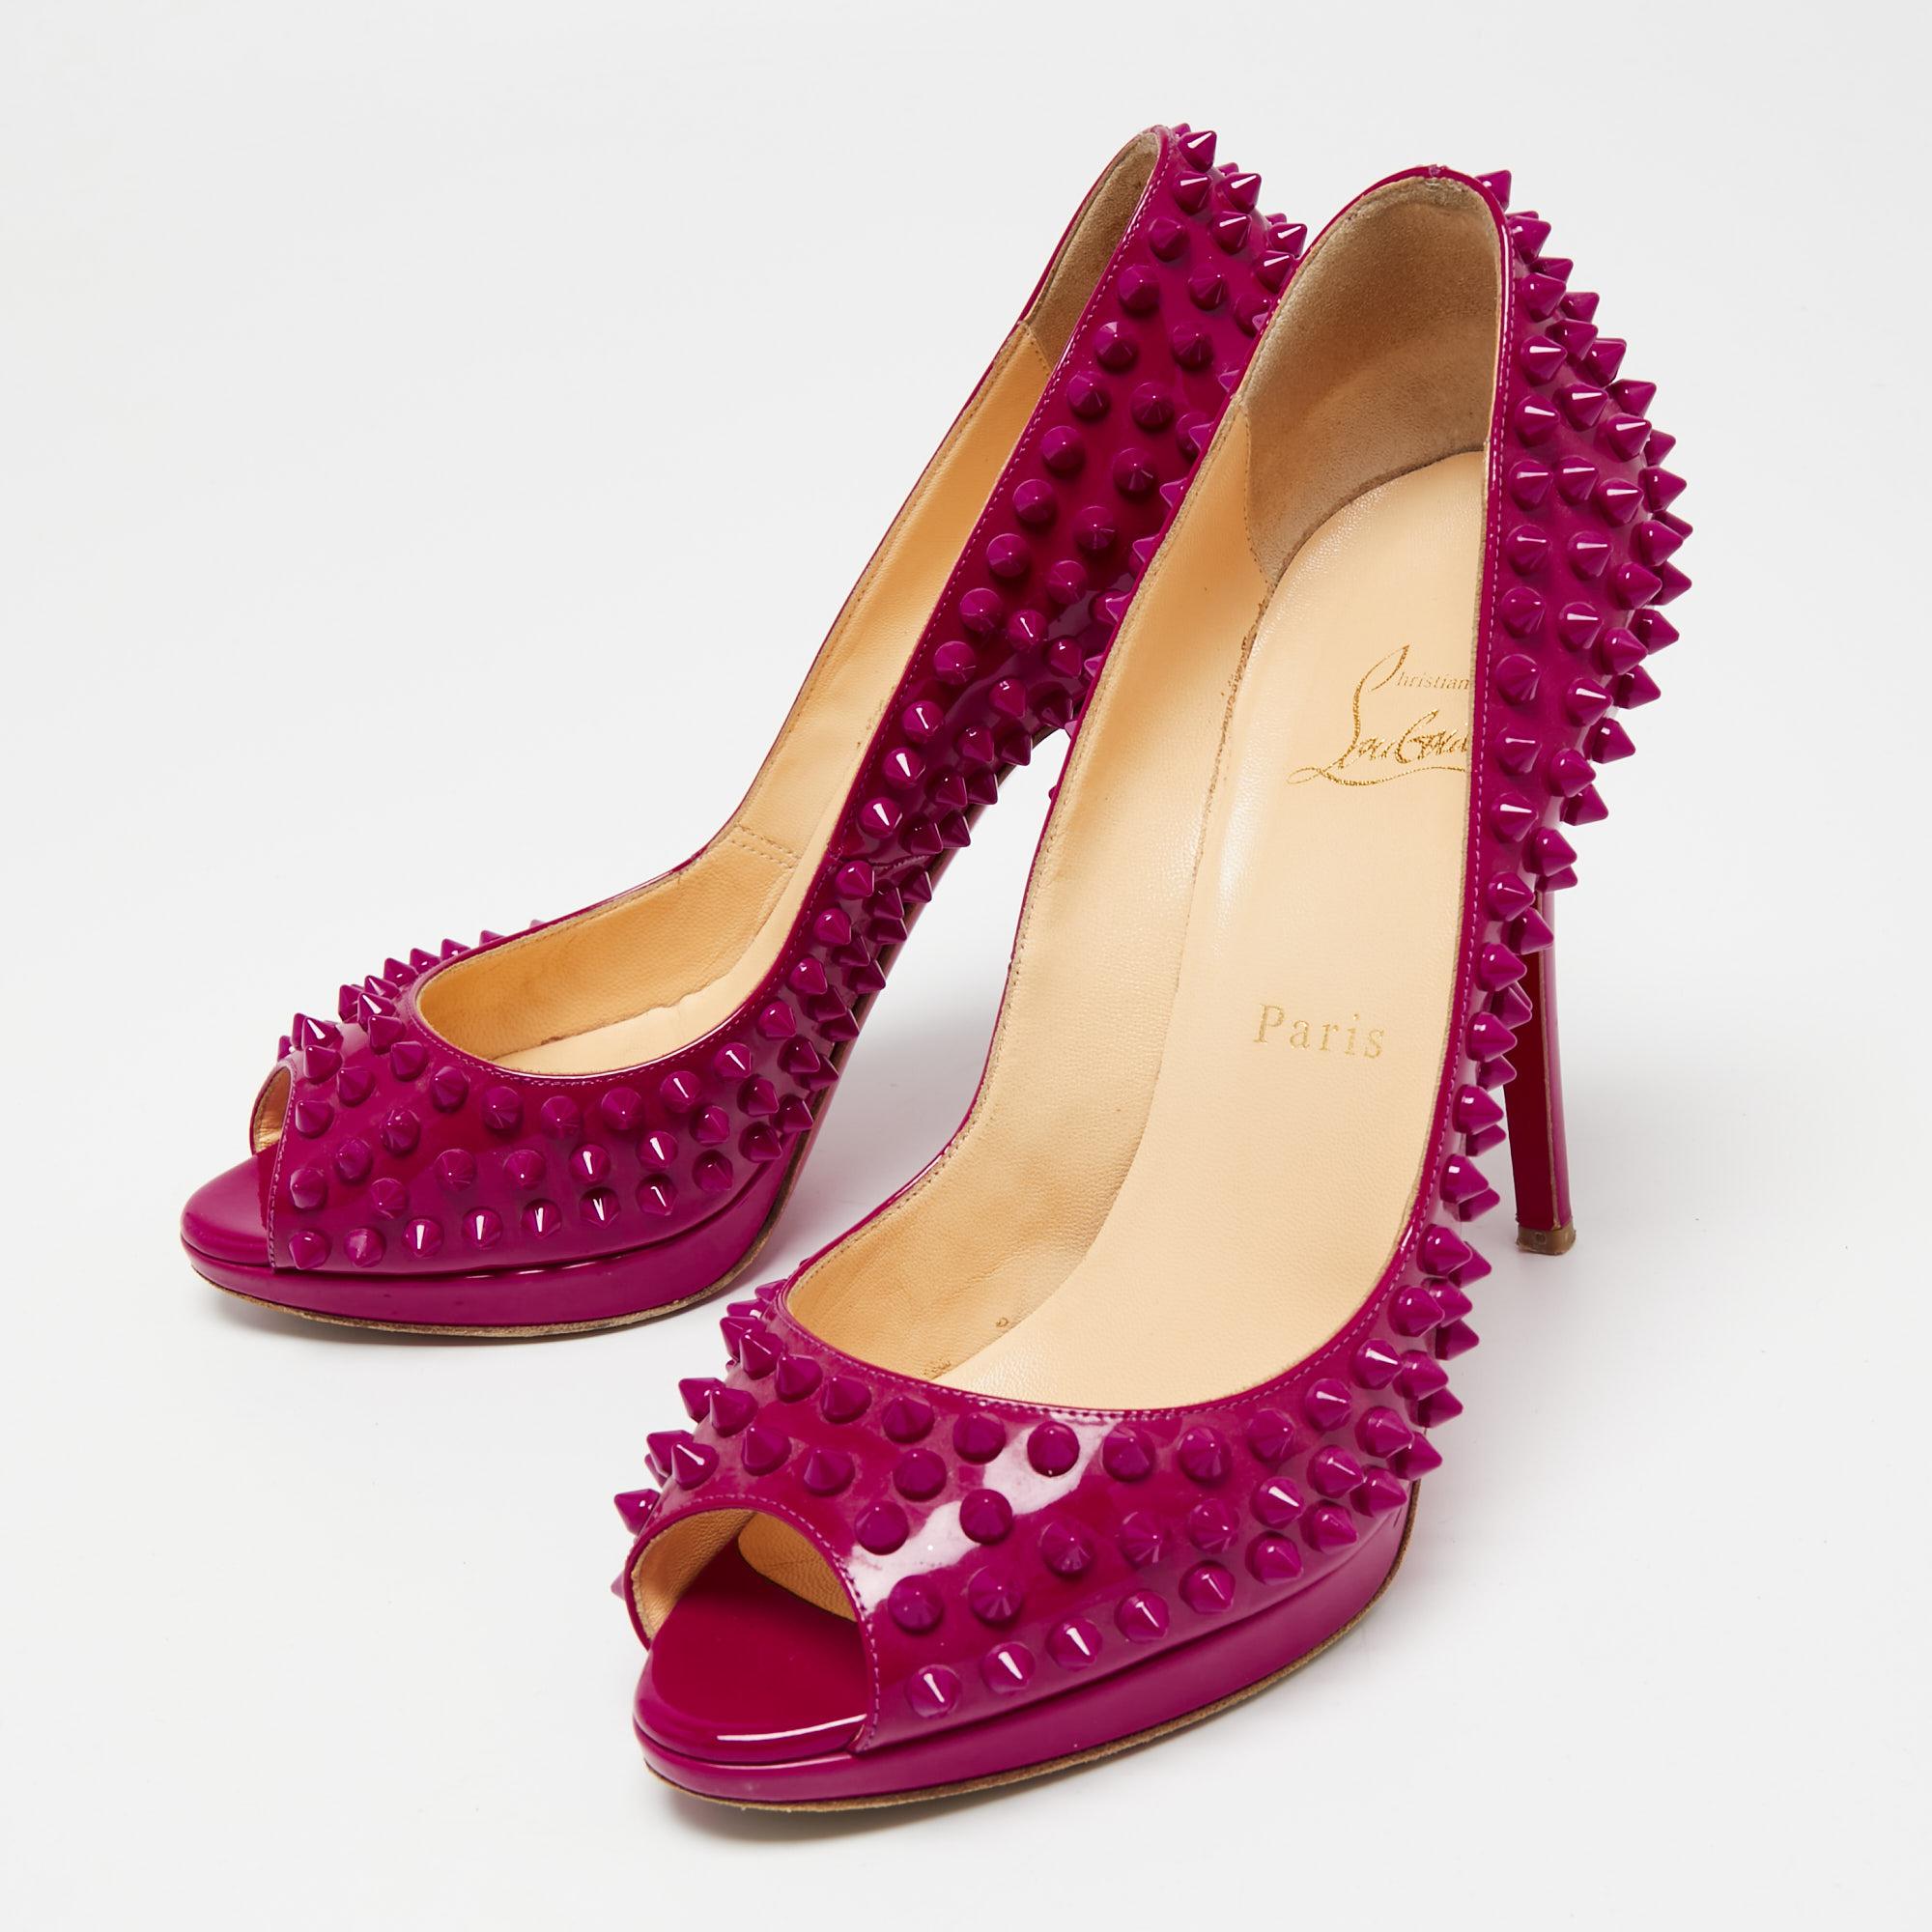 The spikes on the exterior of this pair of Christian Louboutin pumps make it undeniably edgy. Crafted from leather in a hot pink shade, it features peep-toes, 11.5cm heels, and precise cuts. The signature red-lacquered soles adds a touch of